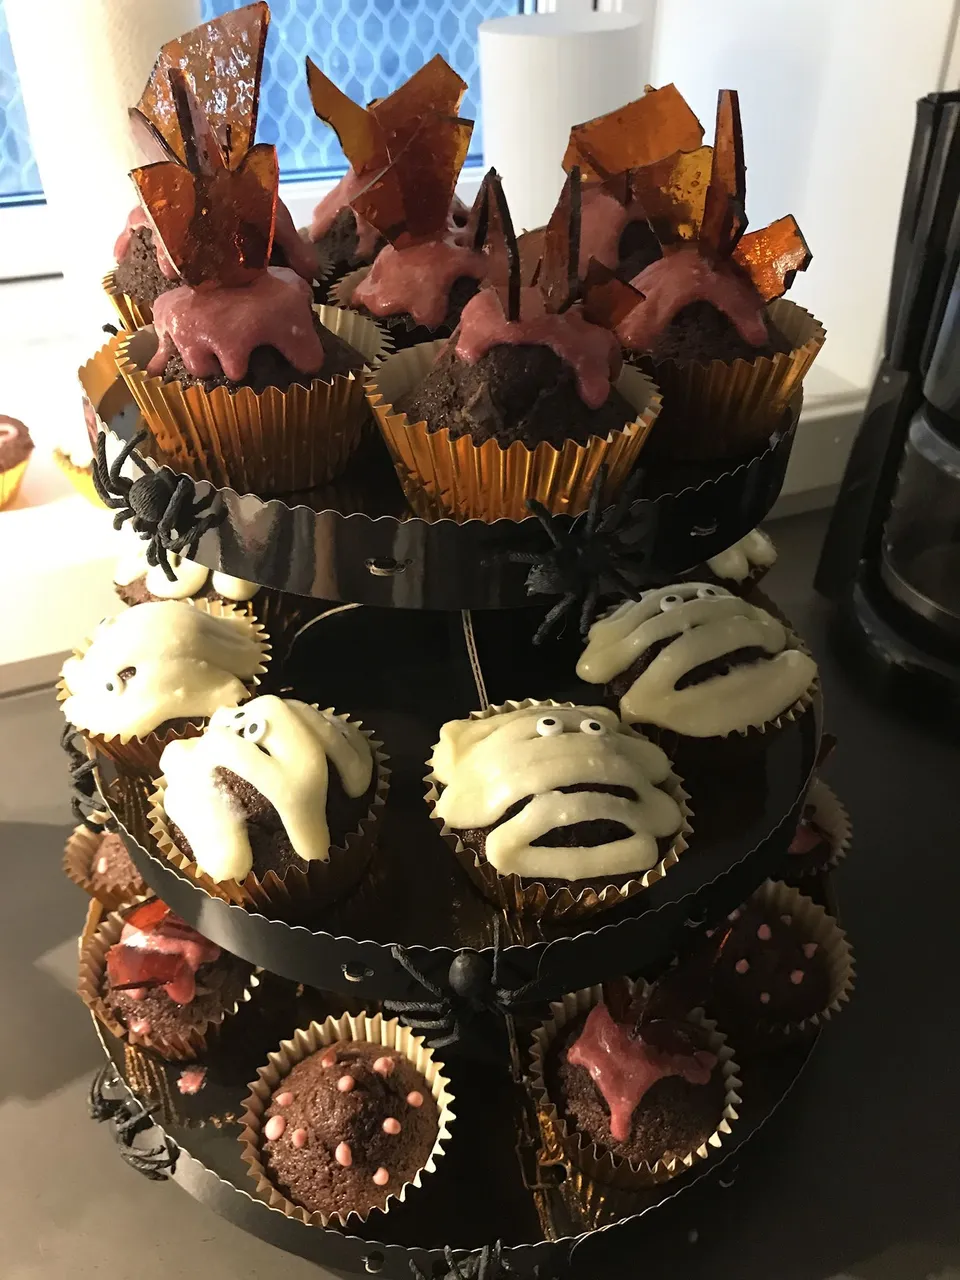 The cupcakes I made. I actually tried to make broken glass of caramel, but the glass turned out brown. At least it tasted good!